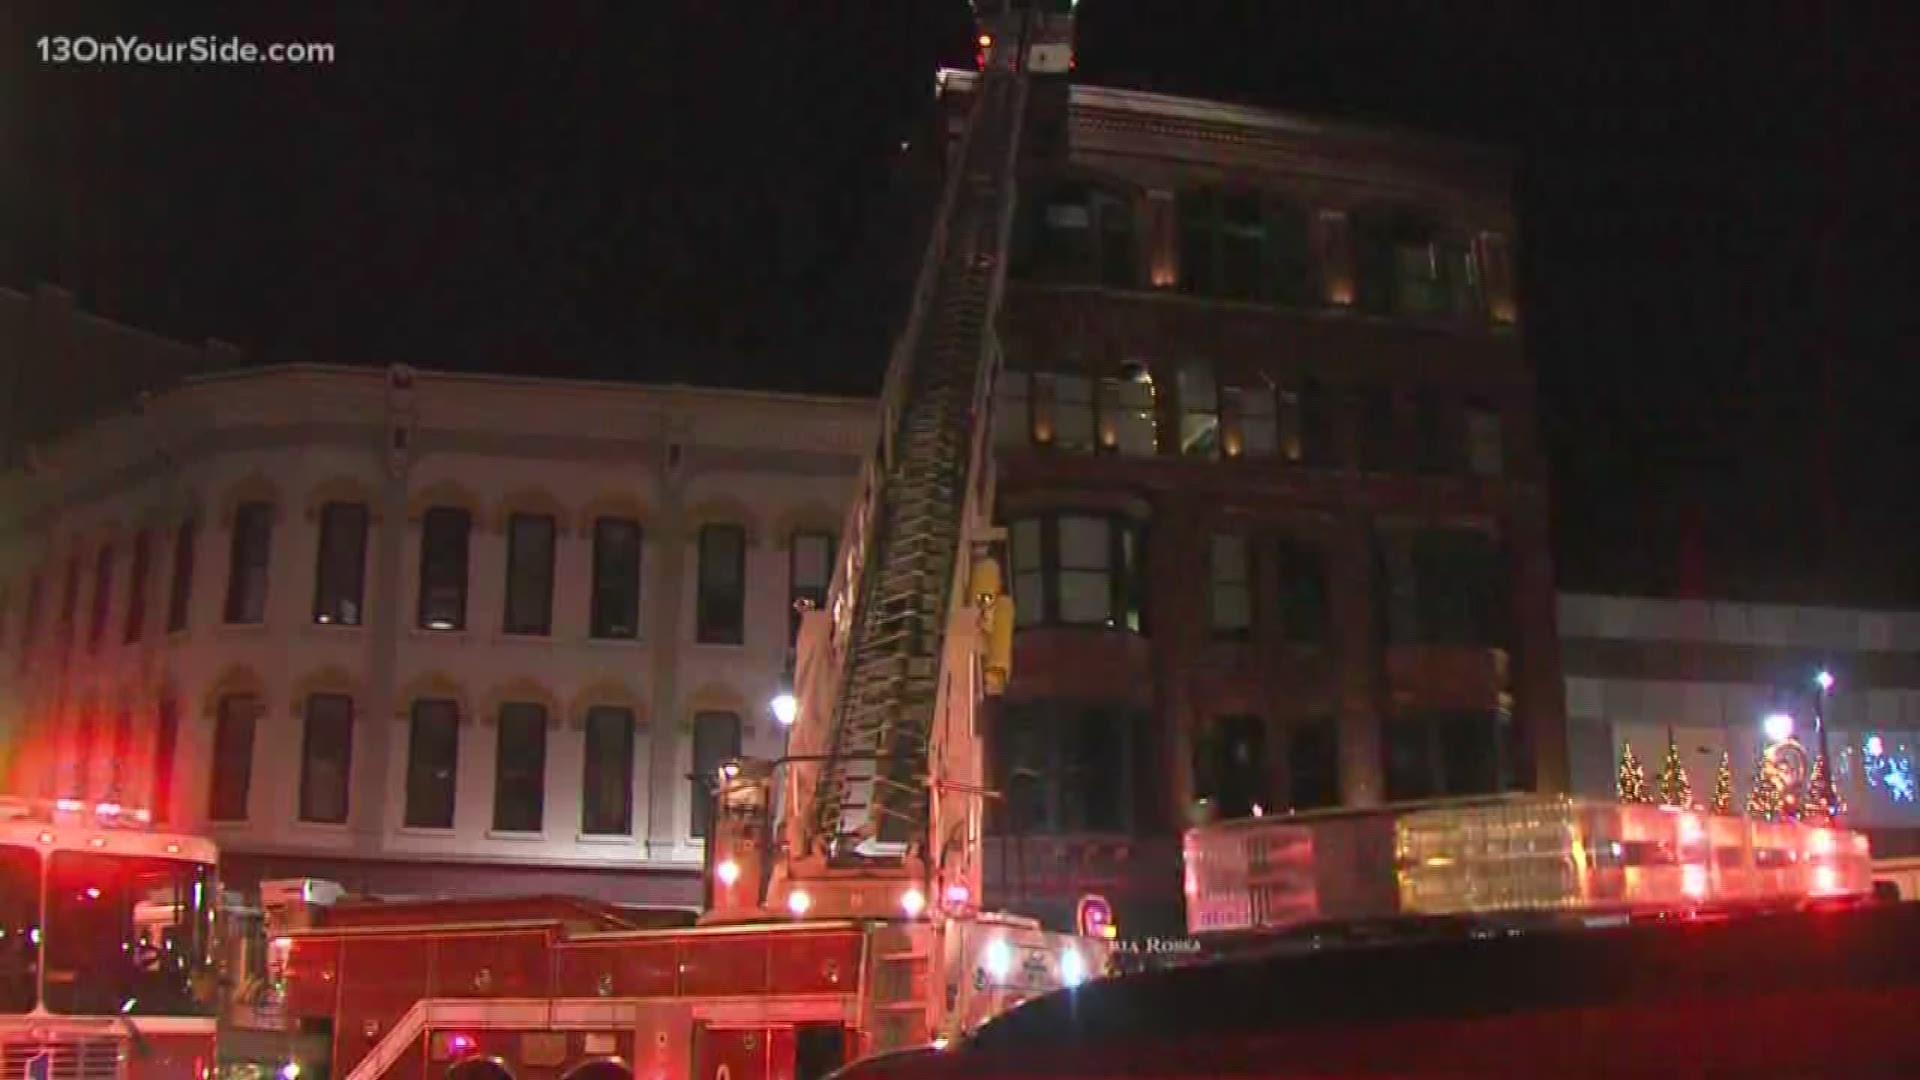 No injuries were reported, but a few streets were shut down because of the fire.